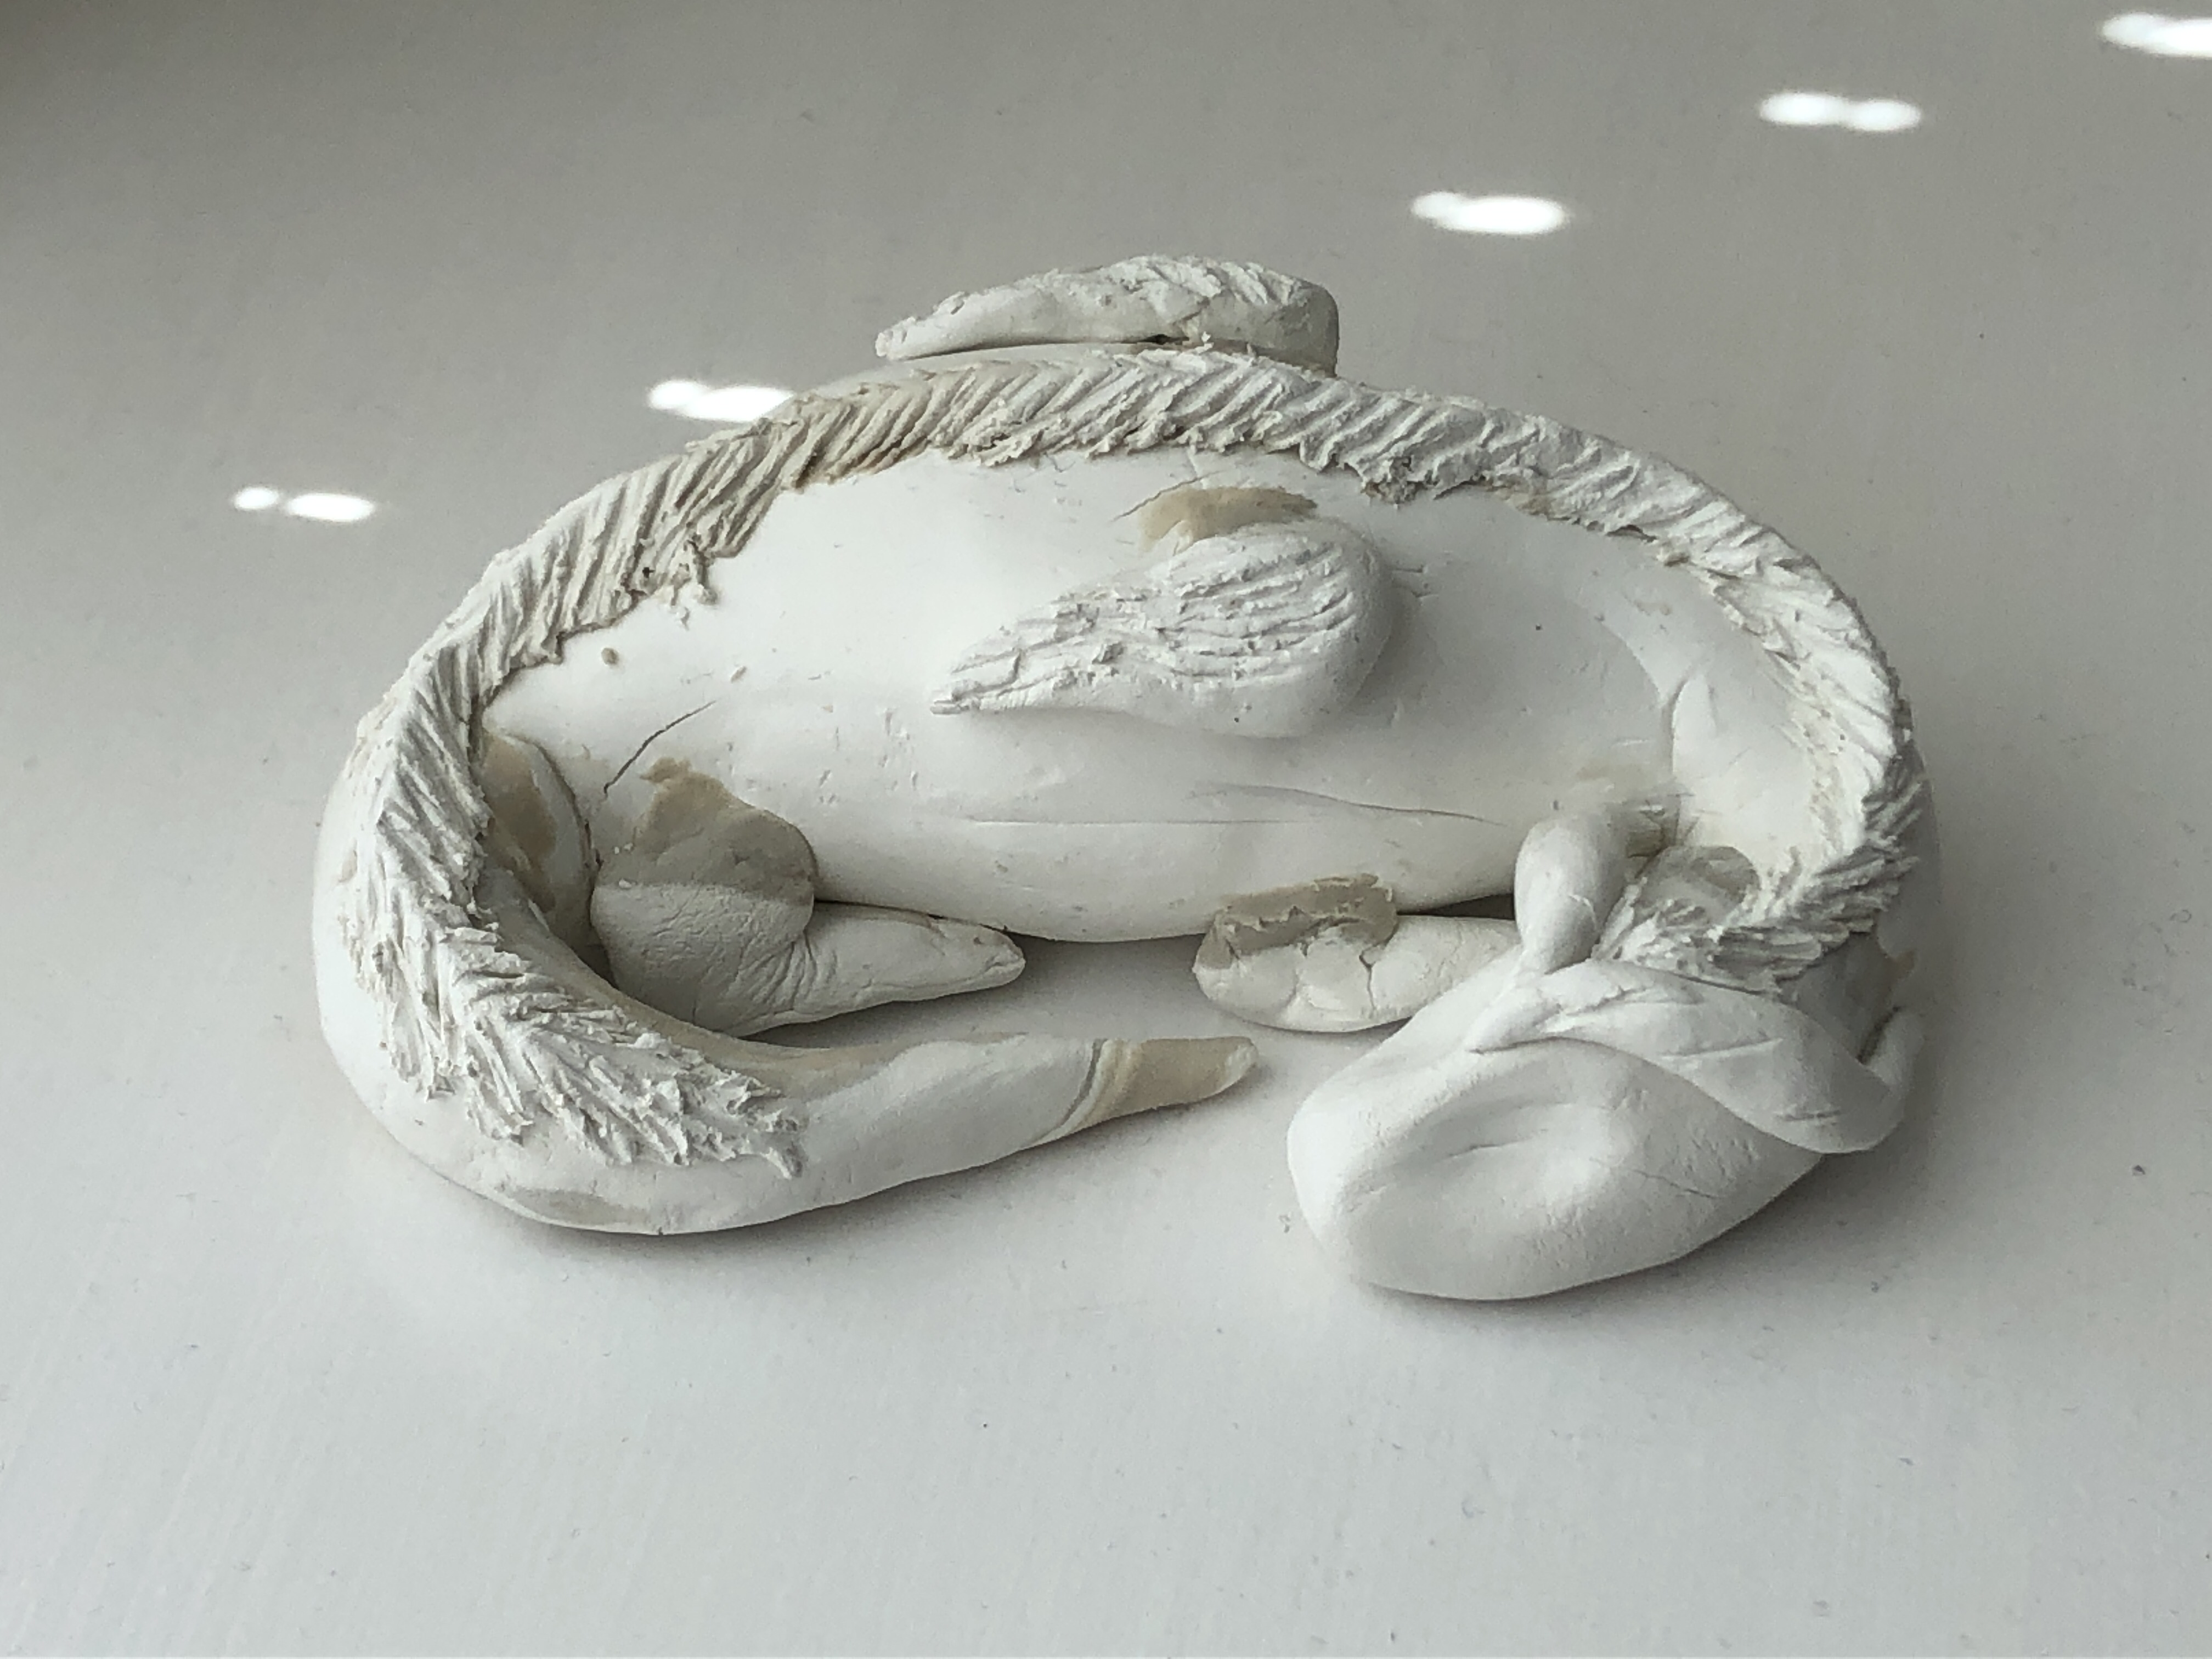 a clay statue of a round sleeping dragon